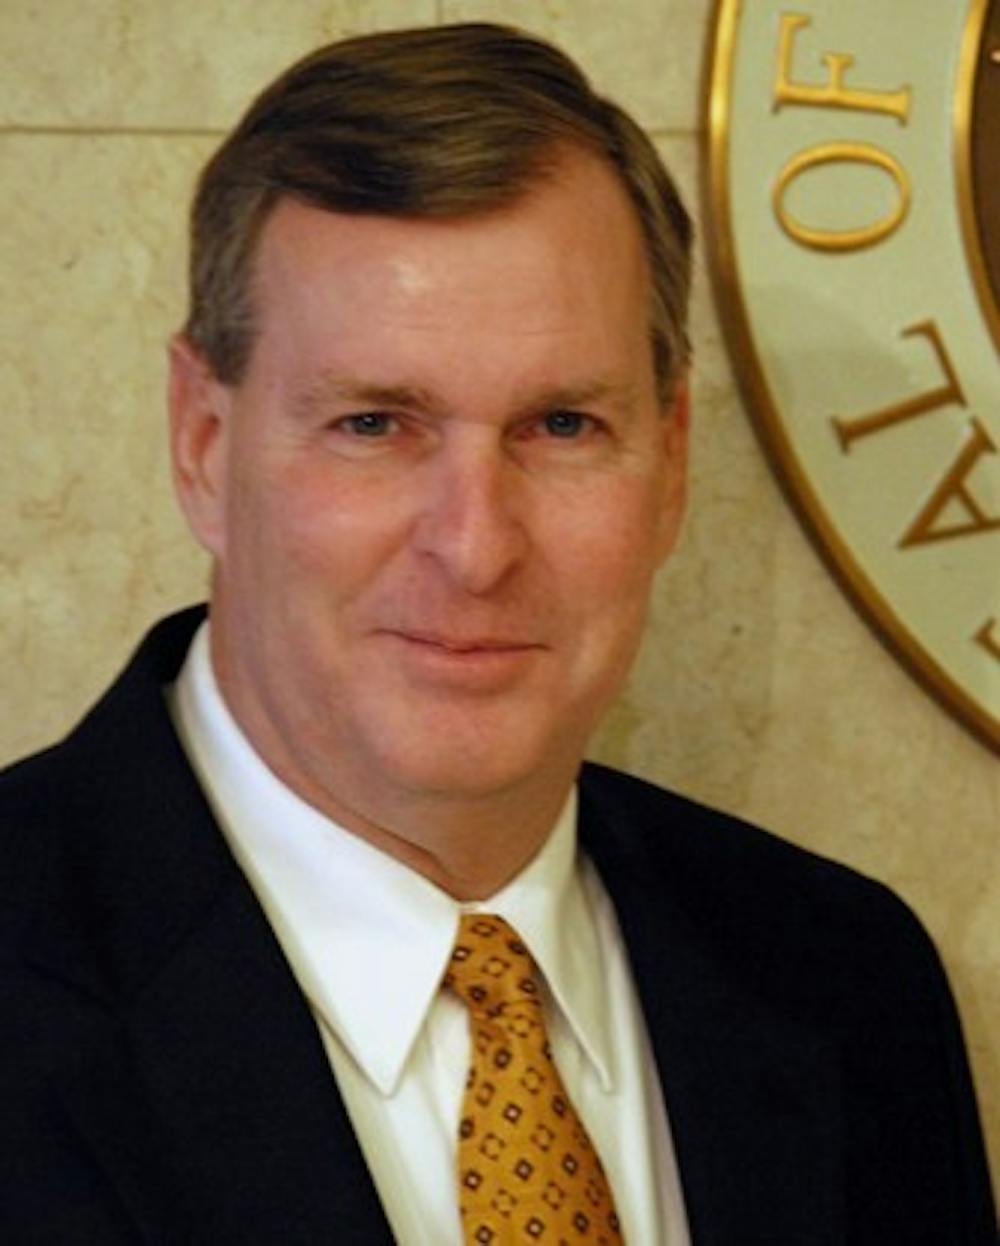 <p>Former Indianapolis mayor Greg Ballard will come to speak in the Architecture Building Nov. 7 at 4 p.m. Ballard will give his "Creating a Vibrant City" presentation to discuss his roles and contributions to Indianapolis during his two terms as mayor.&nbsp;<i style="background-color: initial;">Wikipedia Commons // Photo Courtesy</i></p>